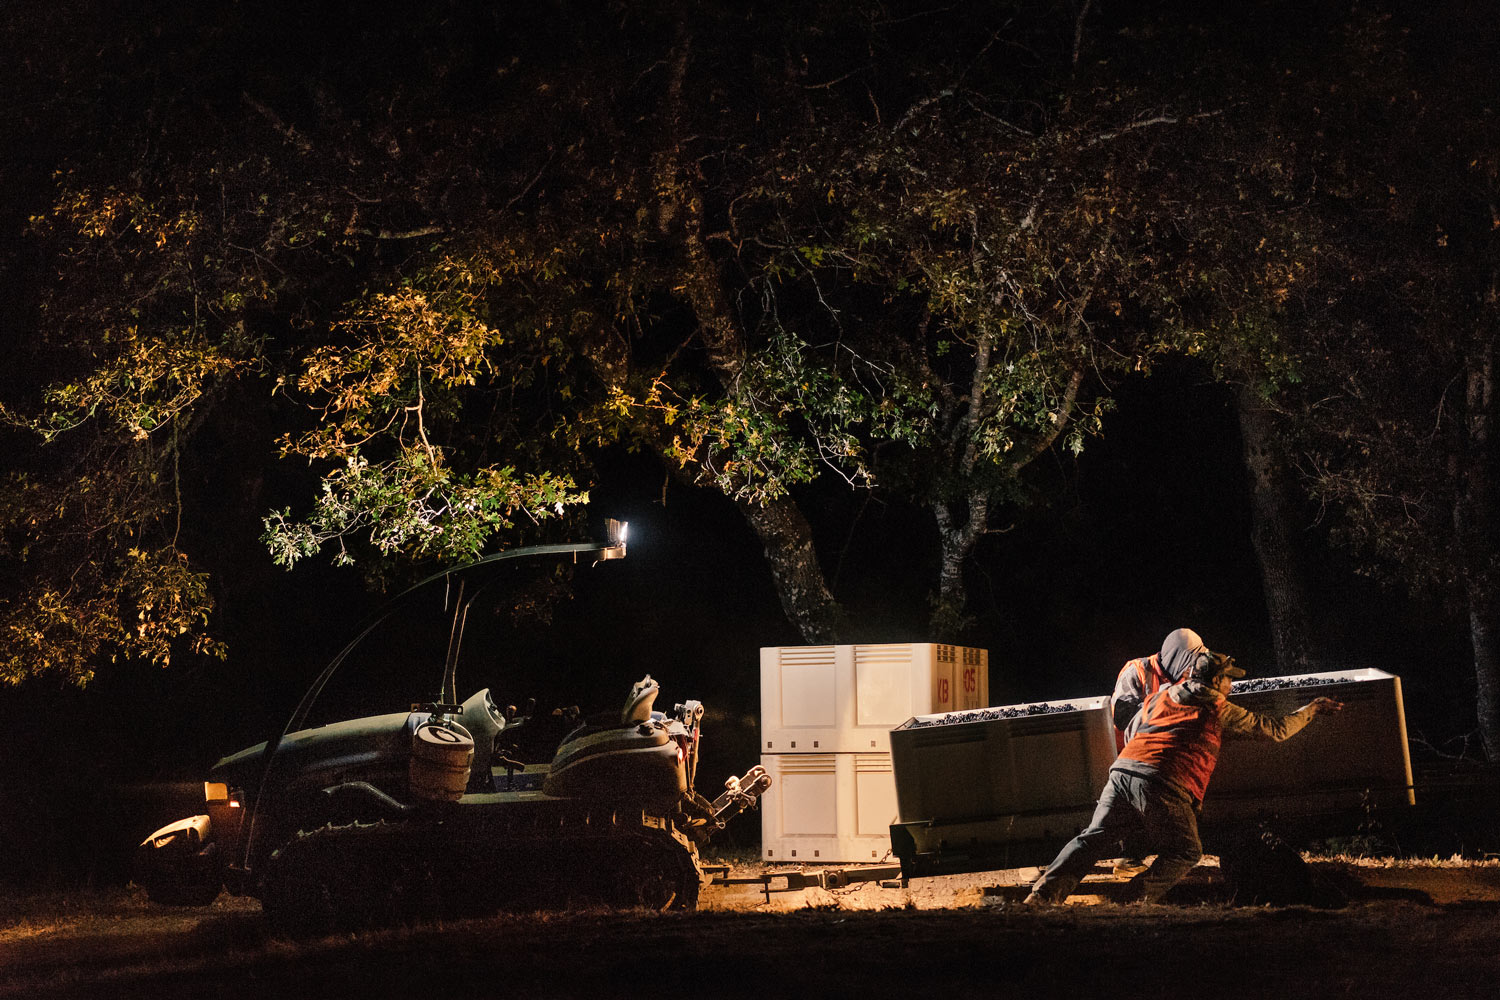 workers harvesting grapes at night